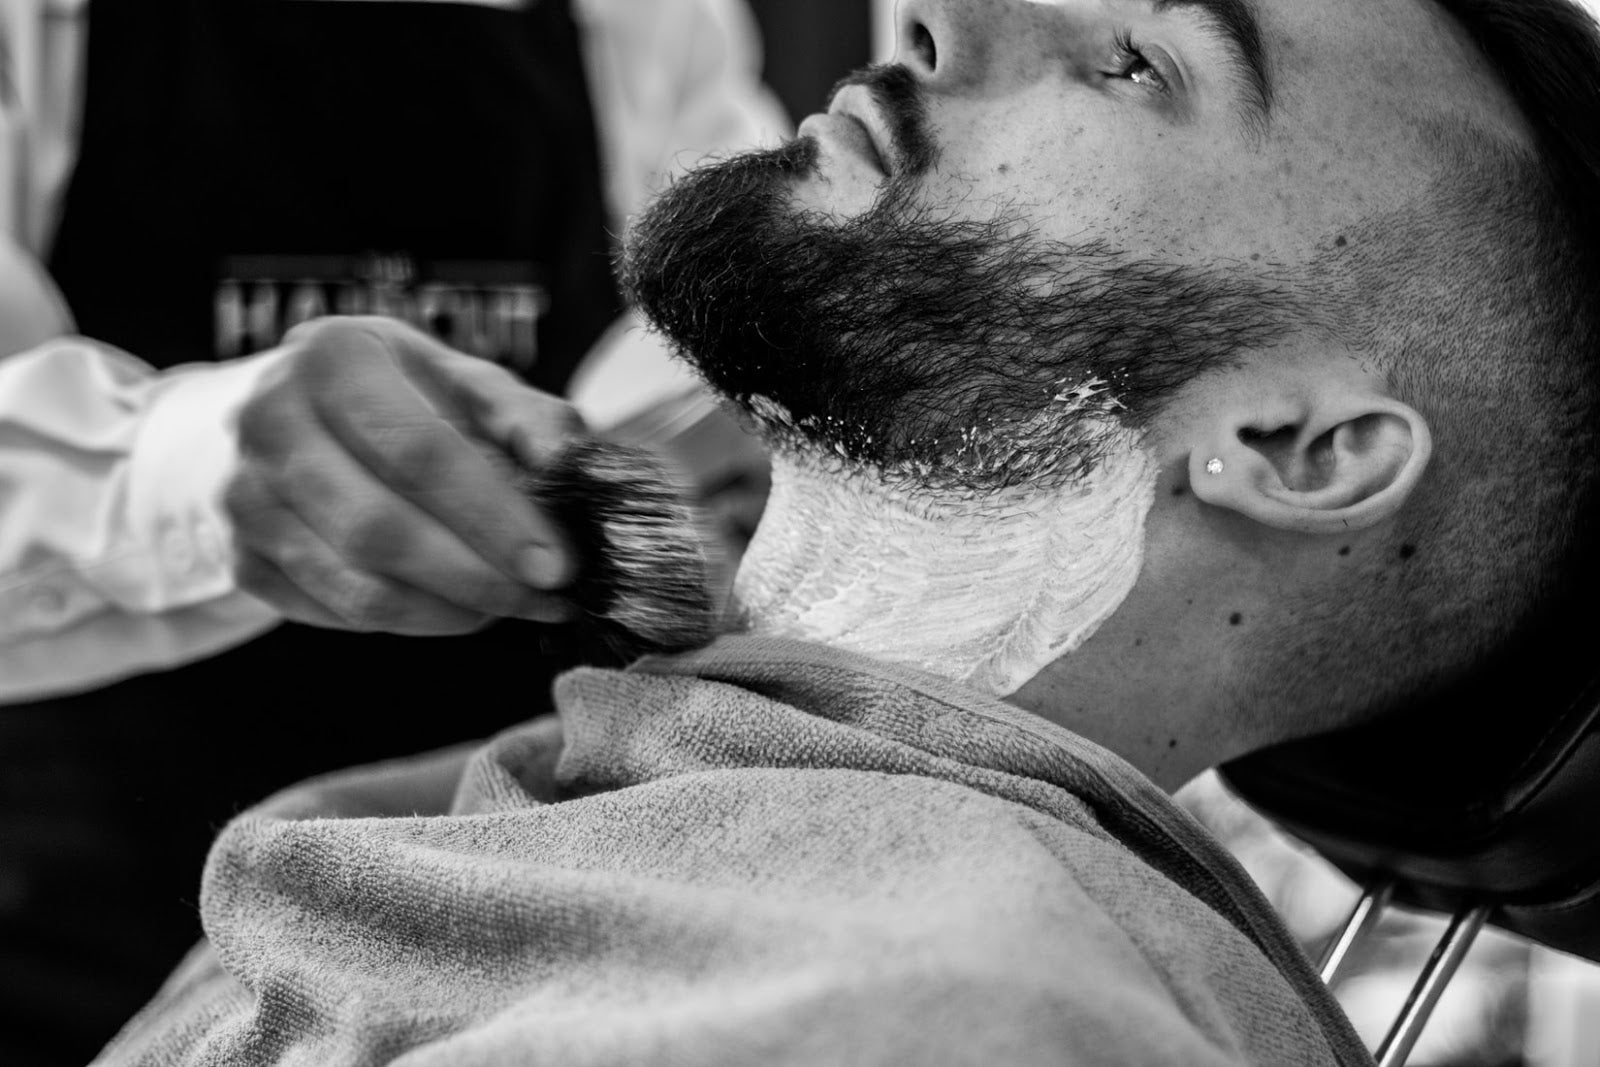 What Is It Like To Get A Barber Shave?